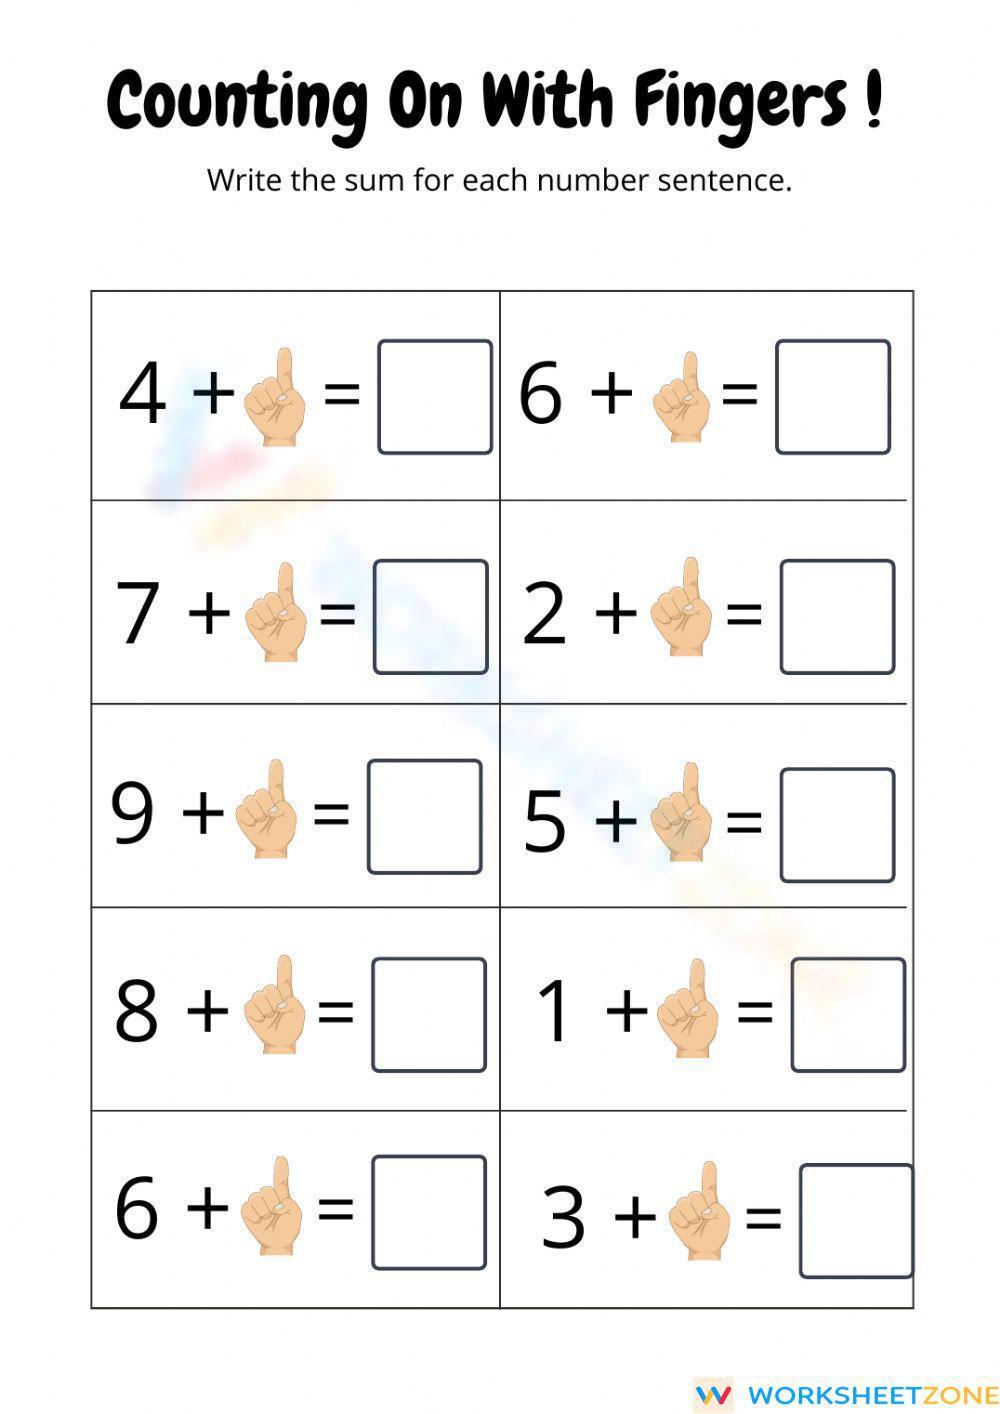 Counting With Fingers Worksheet